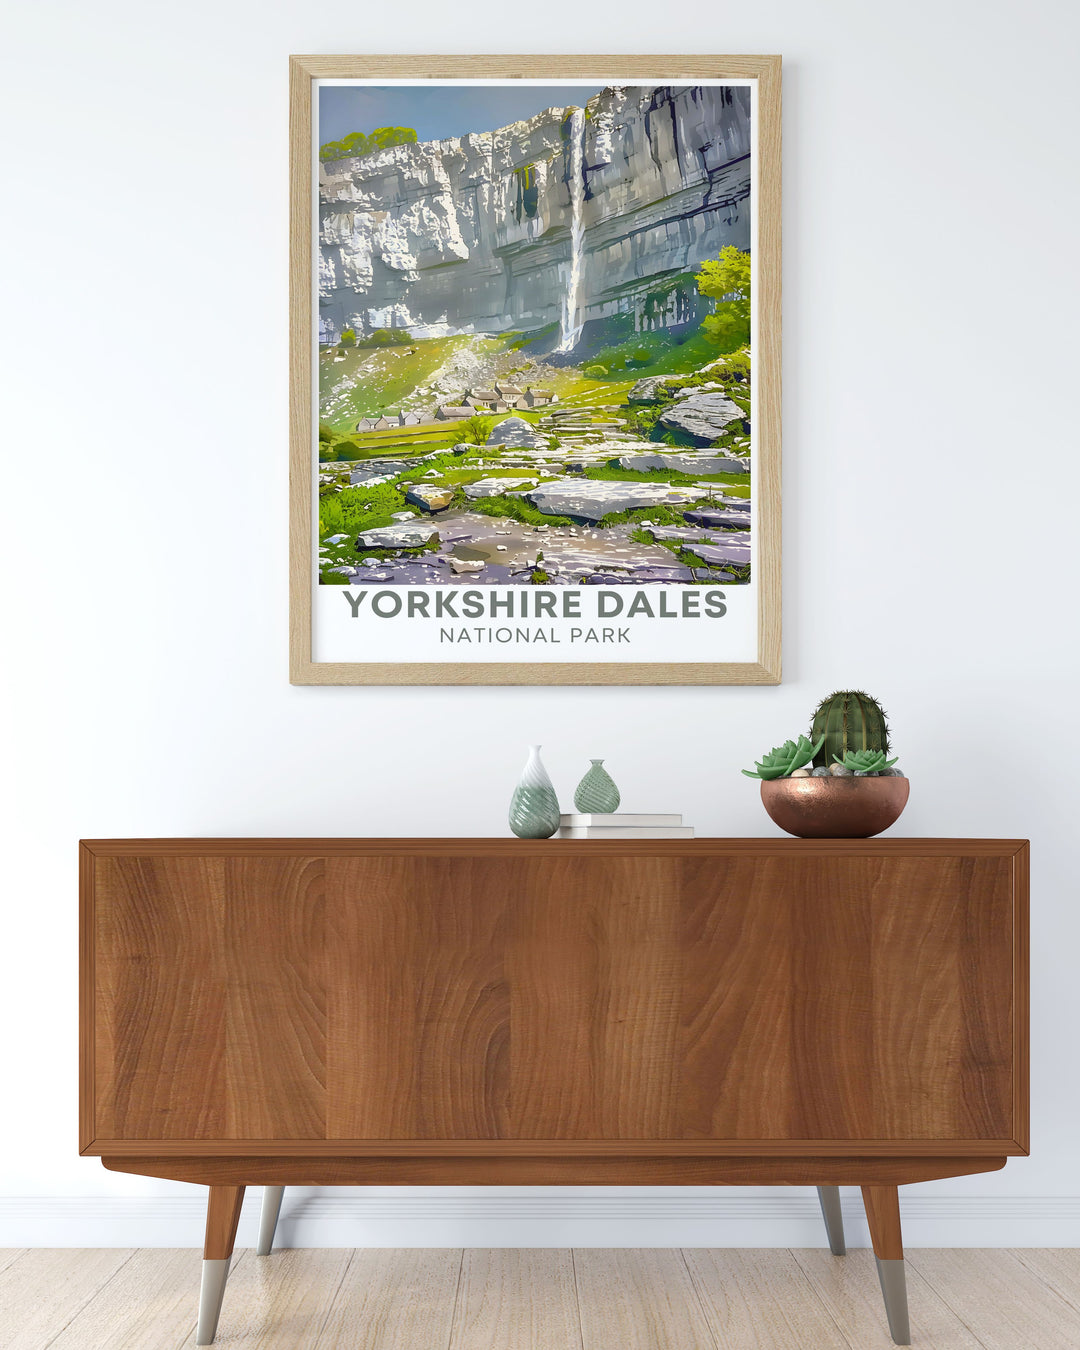 Enhance your living space with this Malhom Cov posterViaduct showcasing the breathtaking scenery of the Yorkshire Dales a must have for those who appreciate the beauty of natural landscapes.